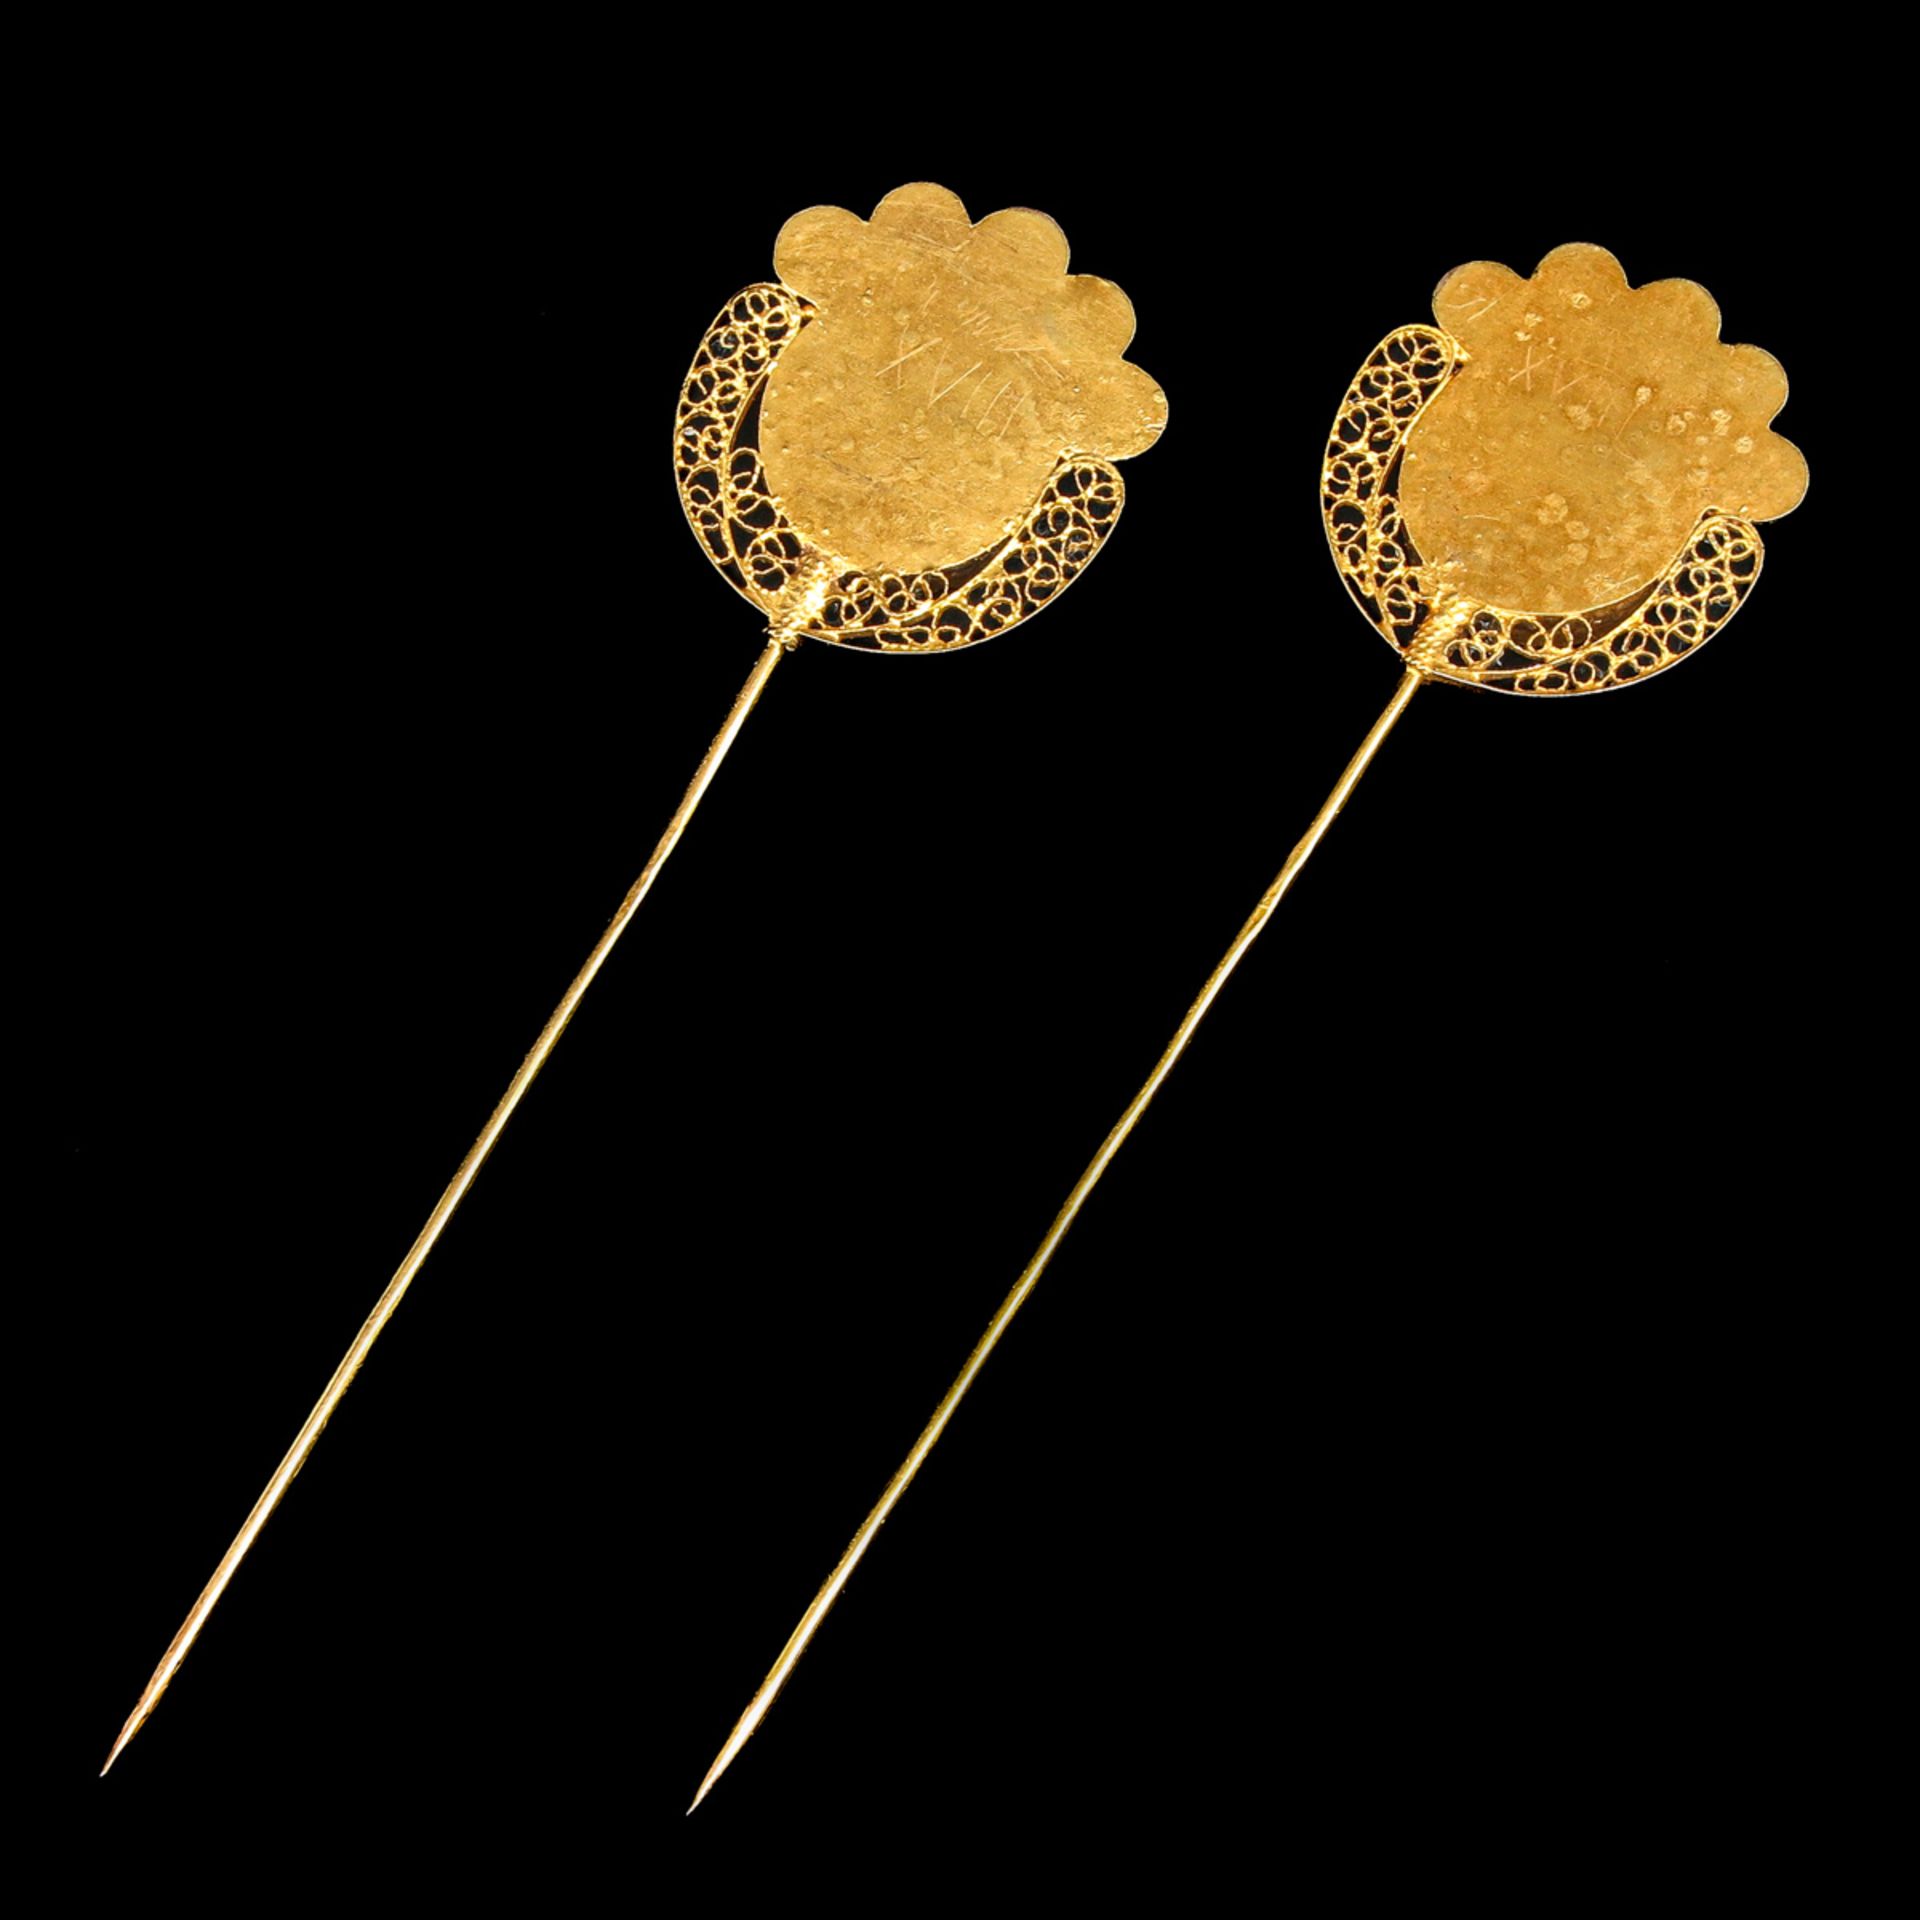 A Pair of 14KG Hat Pins - Image 2 of 4